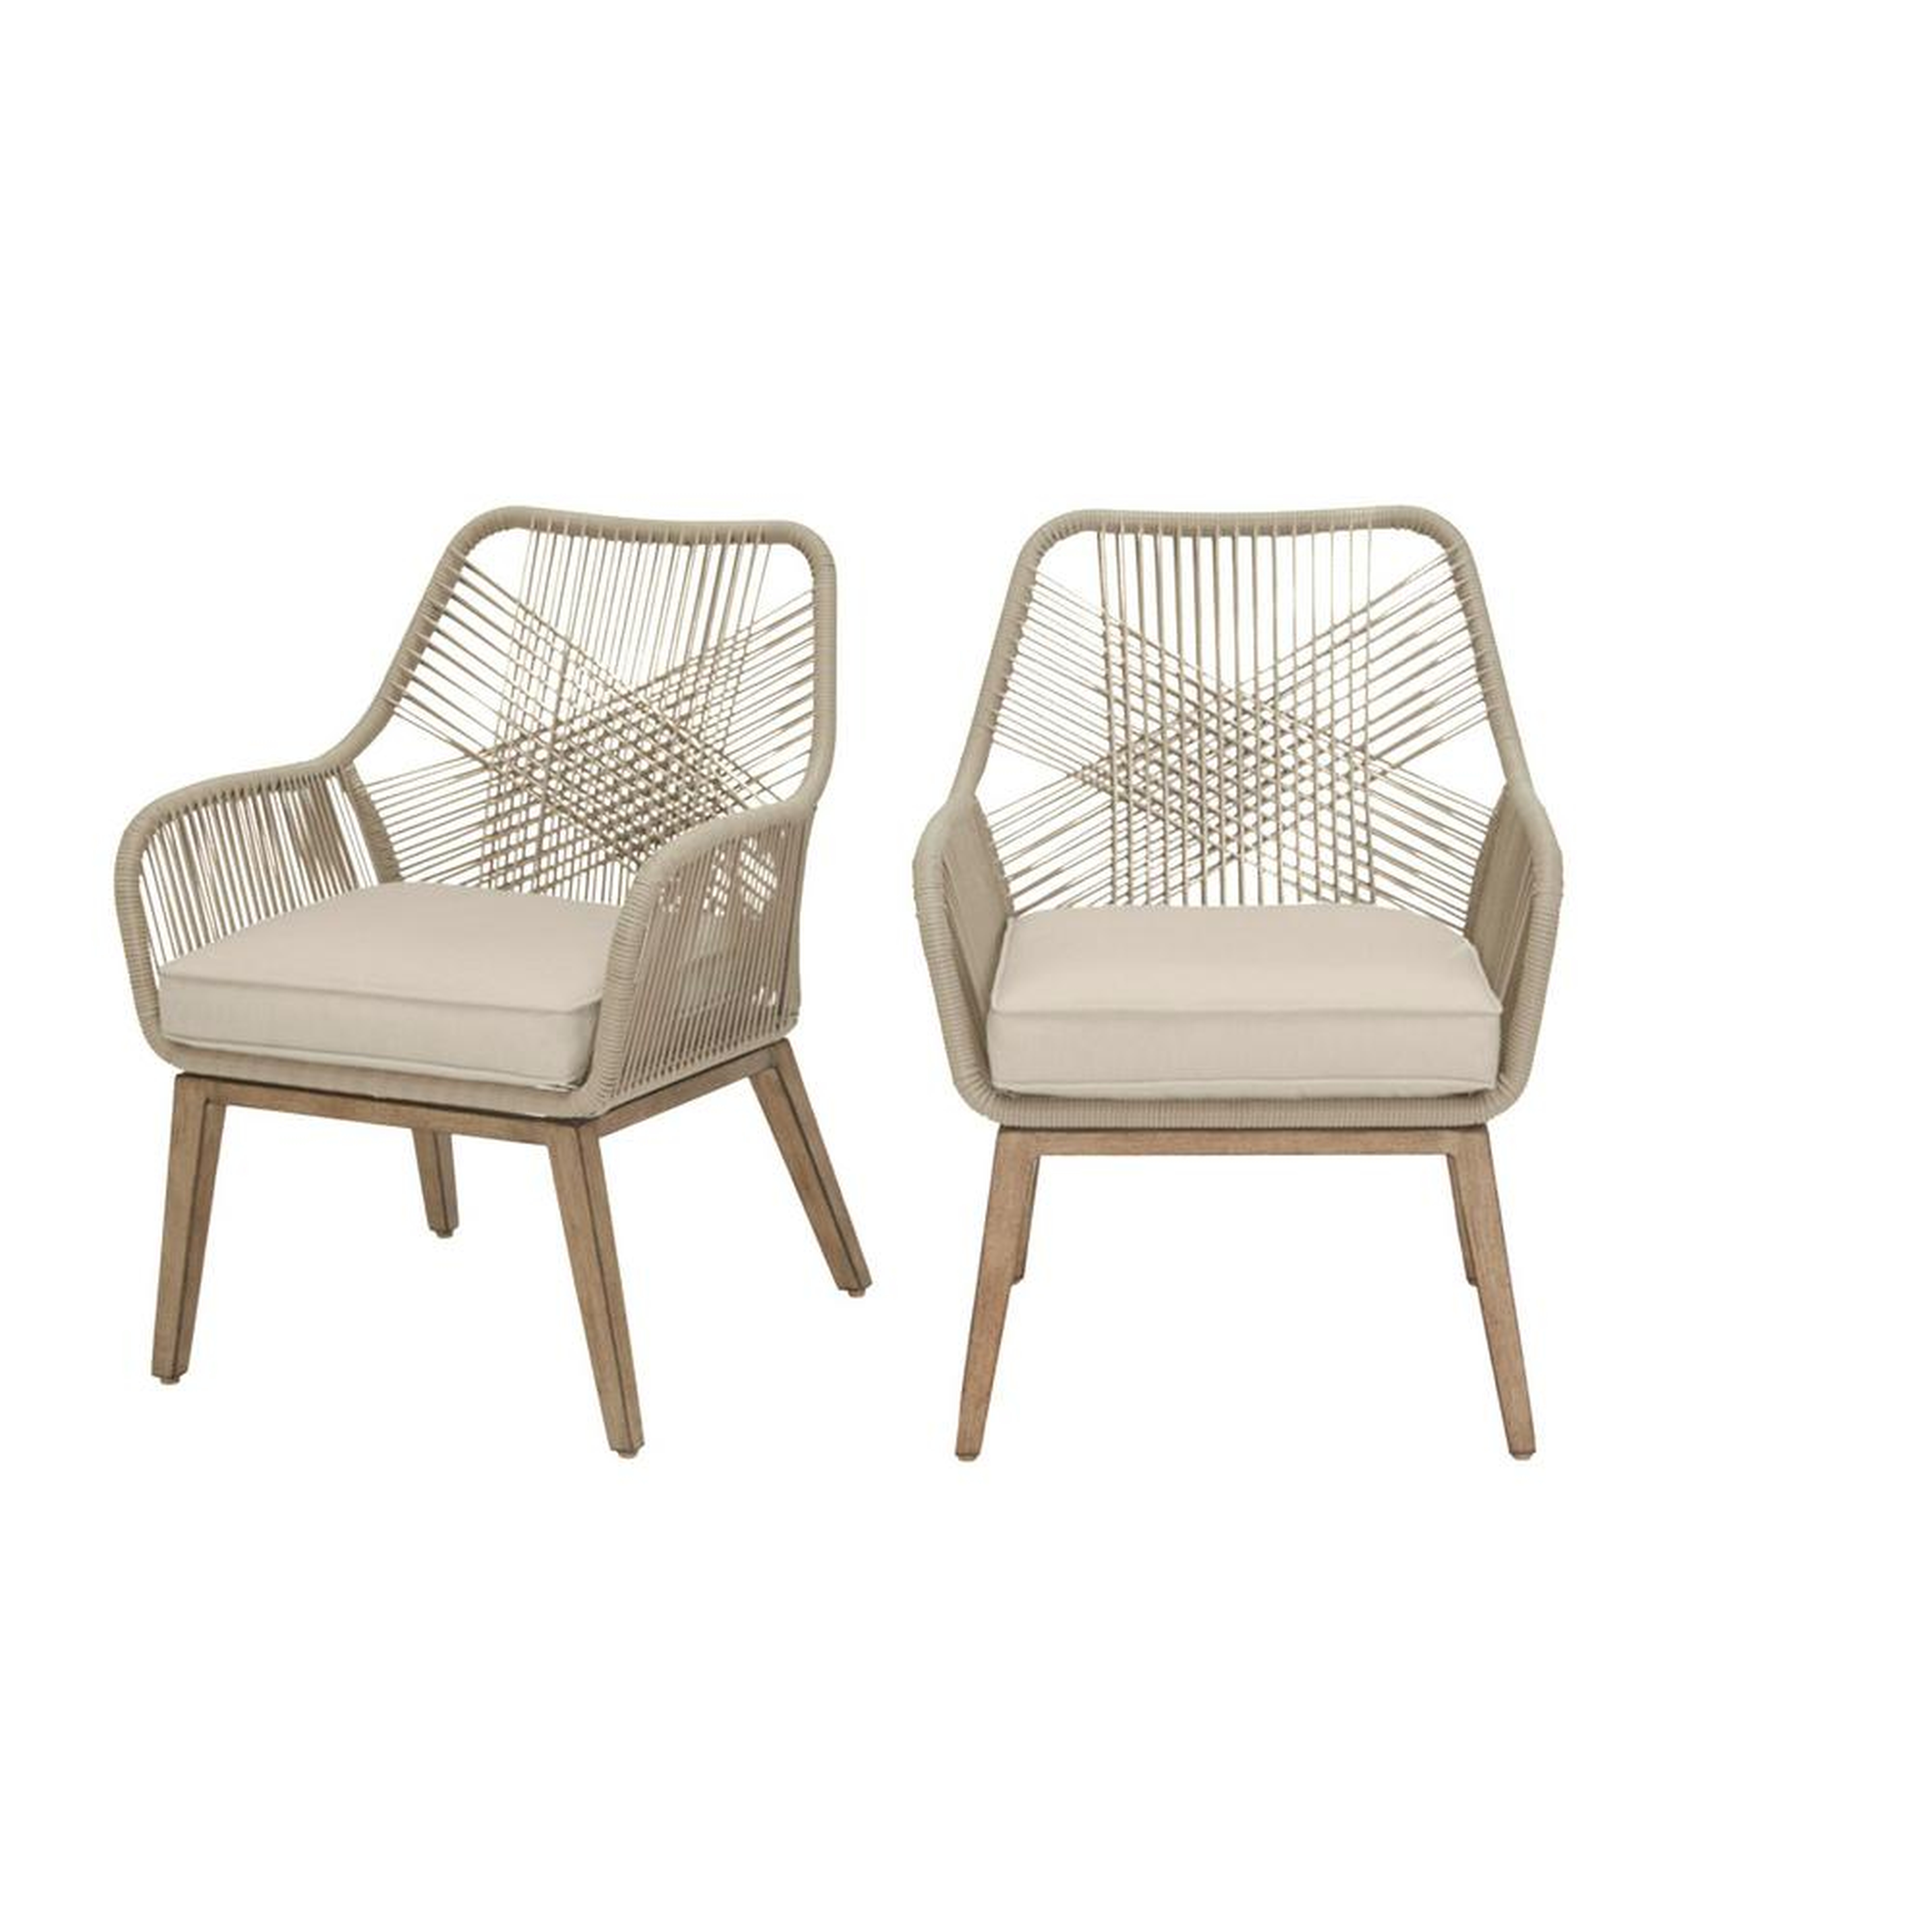 Hampton Bay Haymont Stationary Steel Wicker Outdoor Patio Dining Chair with Beige Cushion (2-Pack) - Home Depot